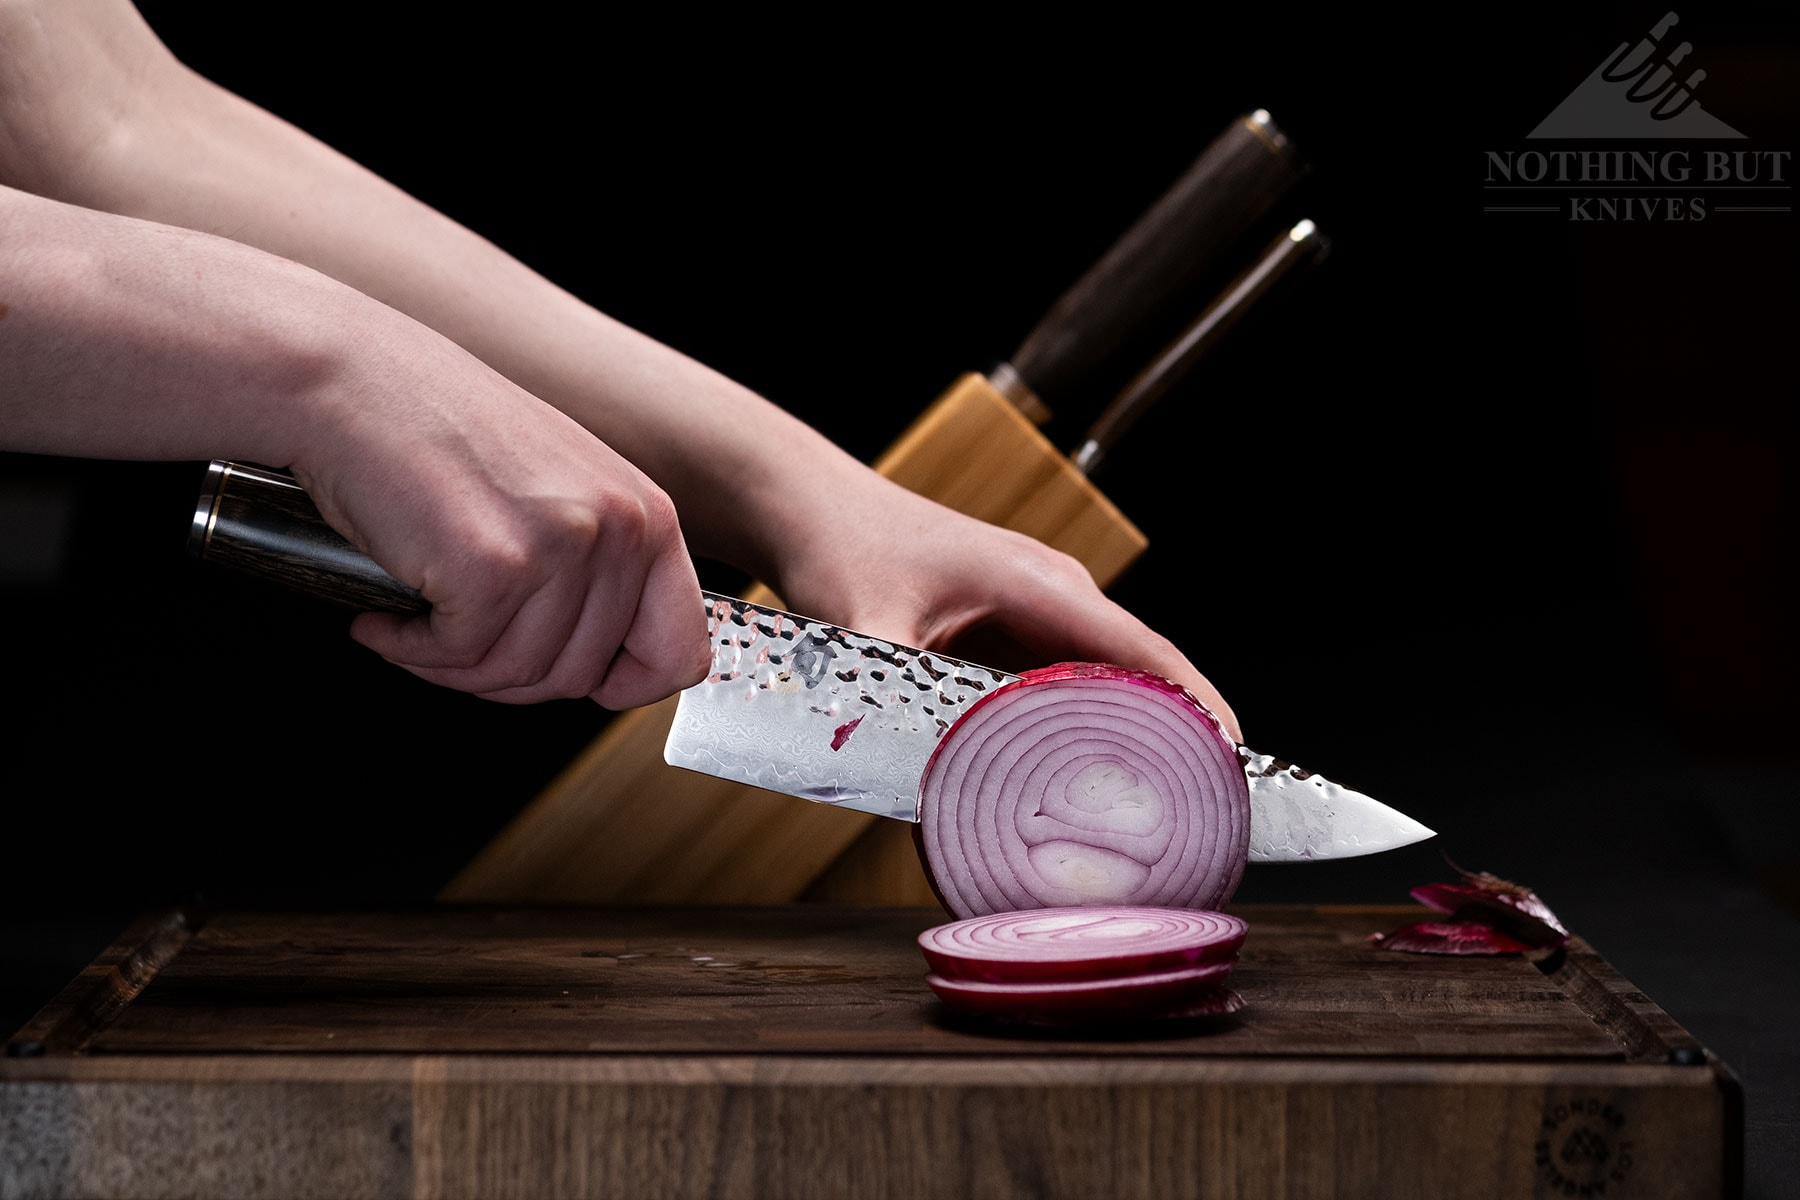 The Shun Premier chef knife being used to slice an onion in front of the 3-piece Build-A-Block set.